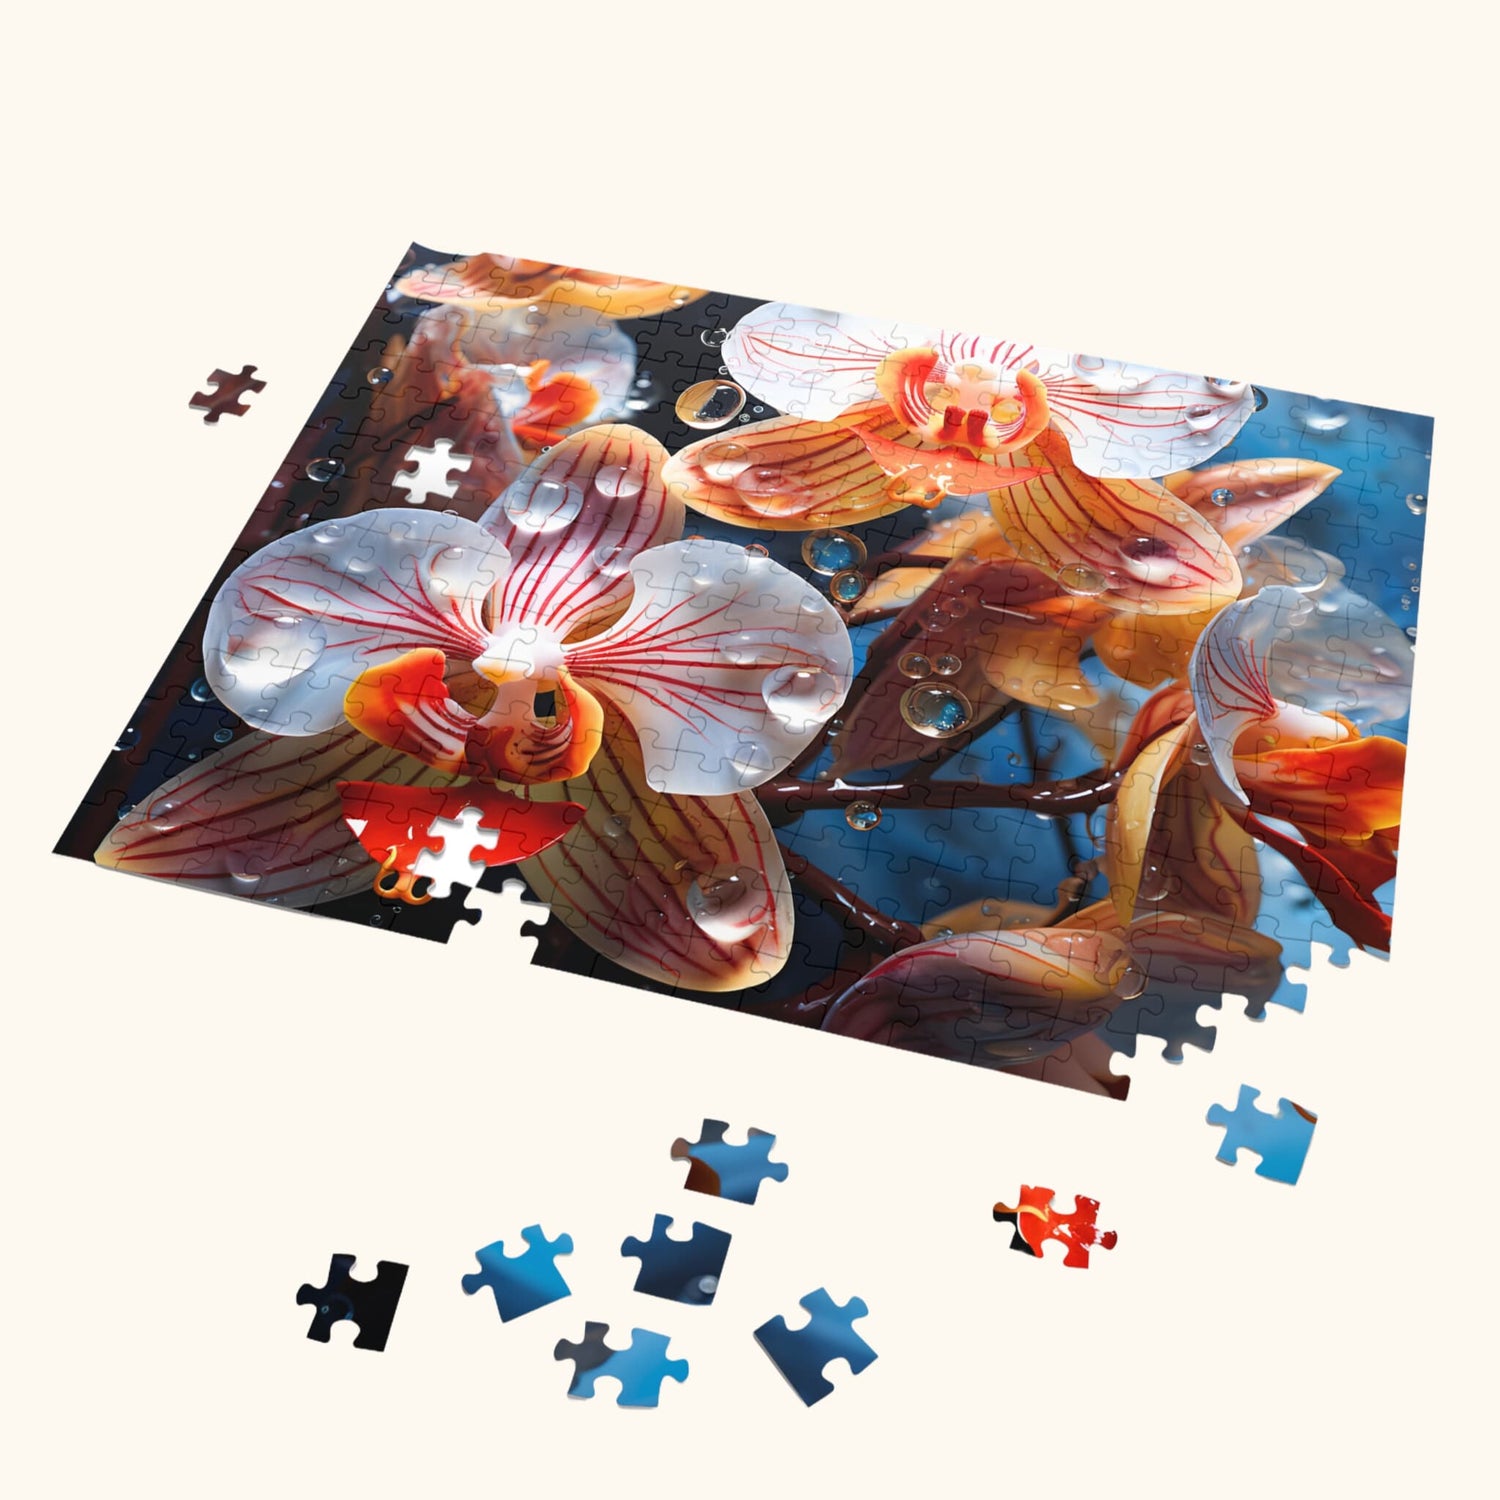 PUZZLE MOCKUP OF A FLOWER OF A 1000 PIECE PUZZLE